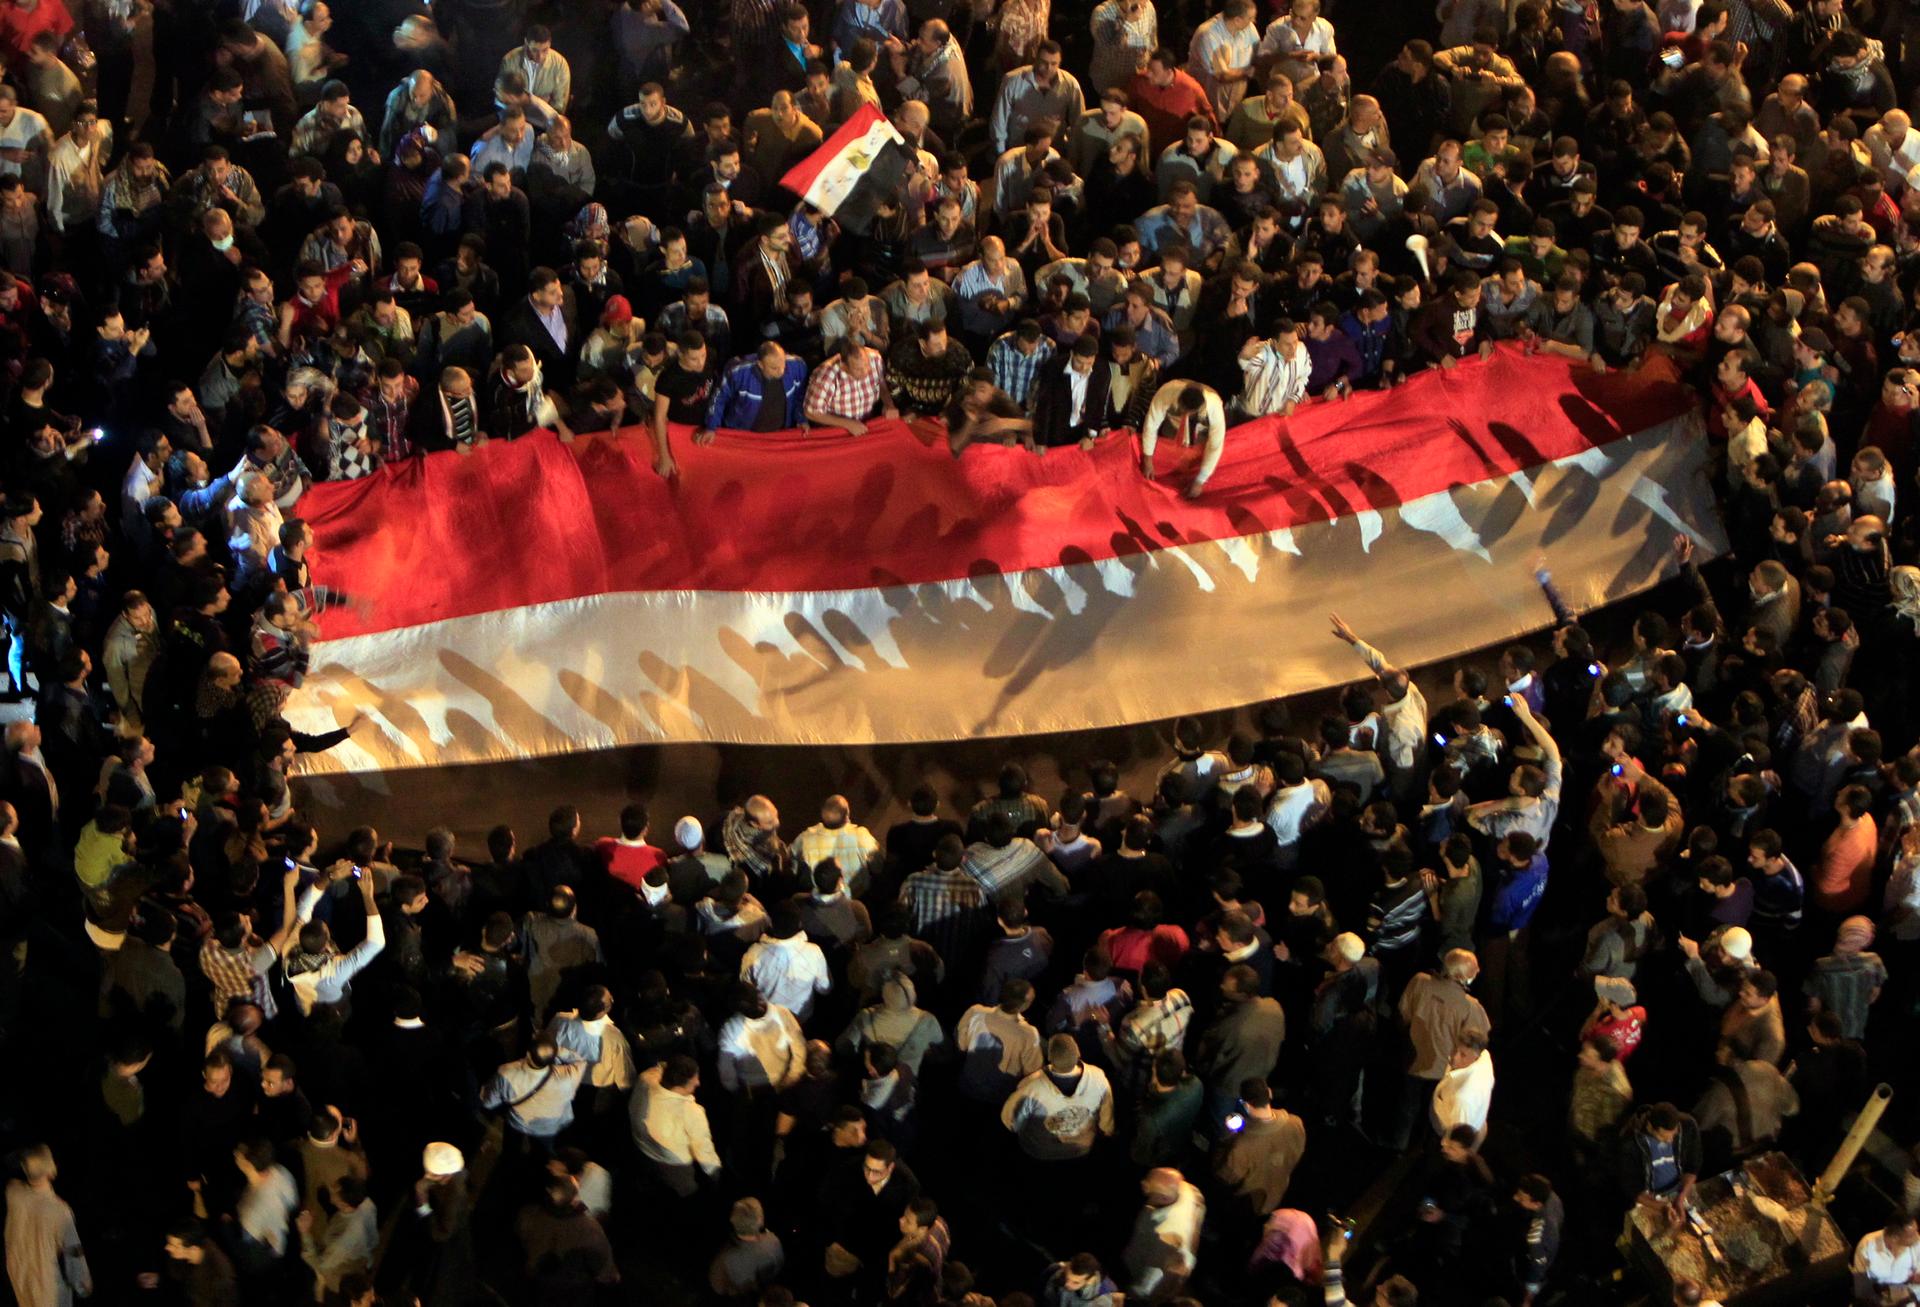 Protesters gather at Tahrir square in Cairo November 23, 2012.